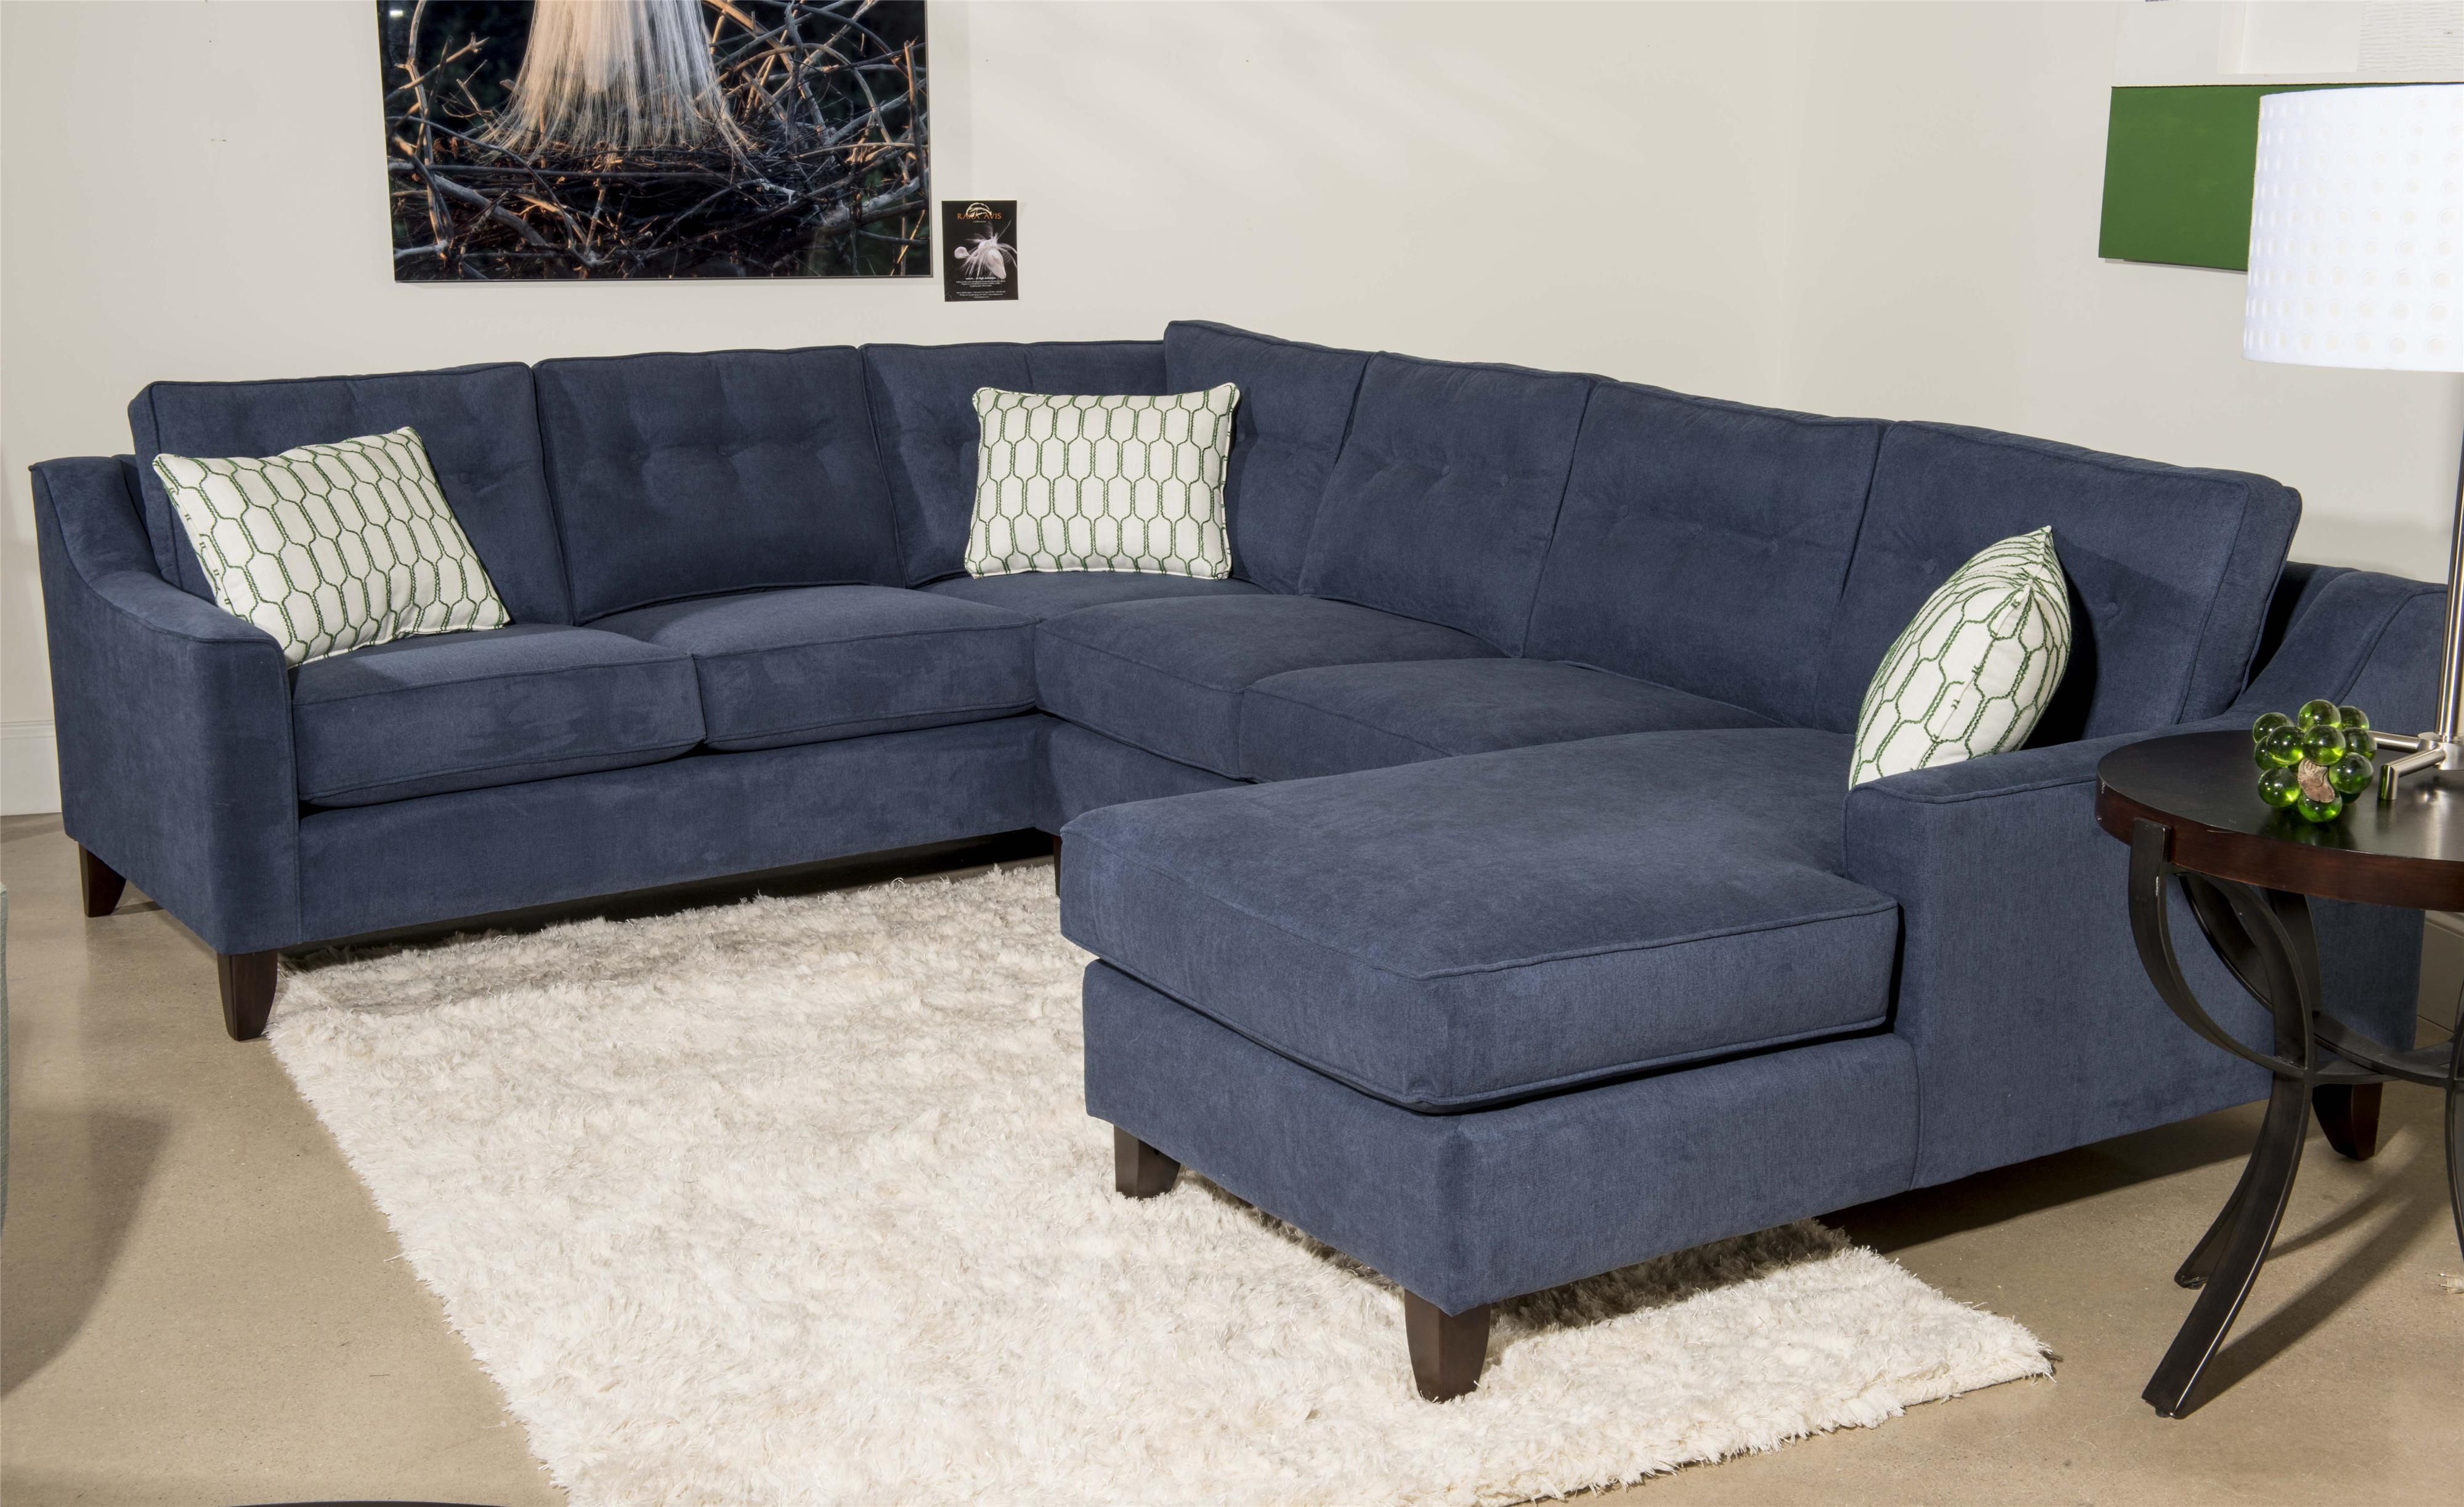 Klaussner Audrina Contemporary 3 Piece Sectional Sofa With Chaise Pertaining To 3 Piece Sectional Sofa Slipcovers (View 4 of 12)